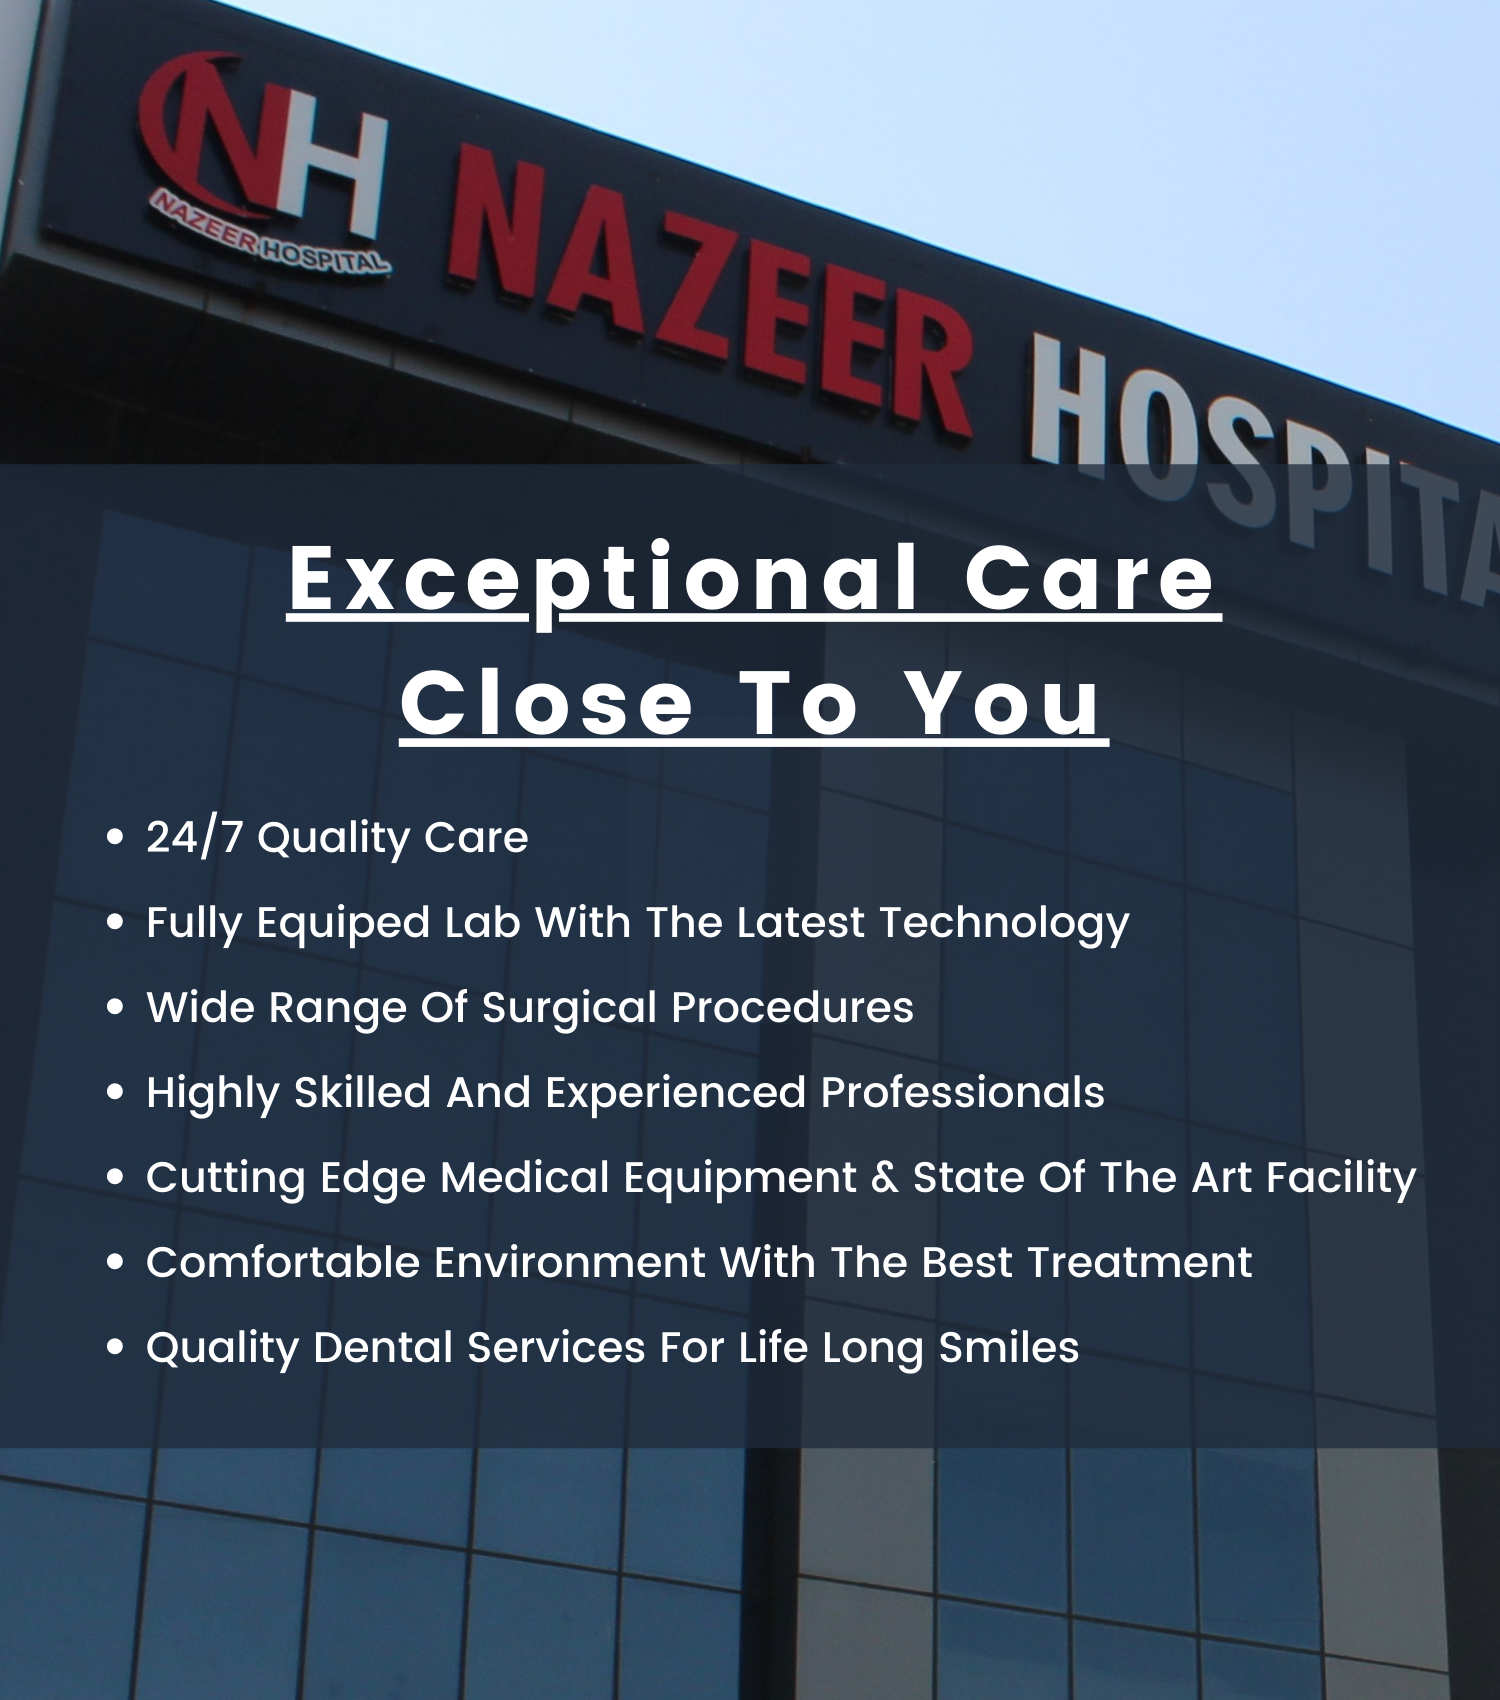 Exceptional Care Close to You